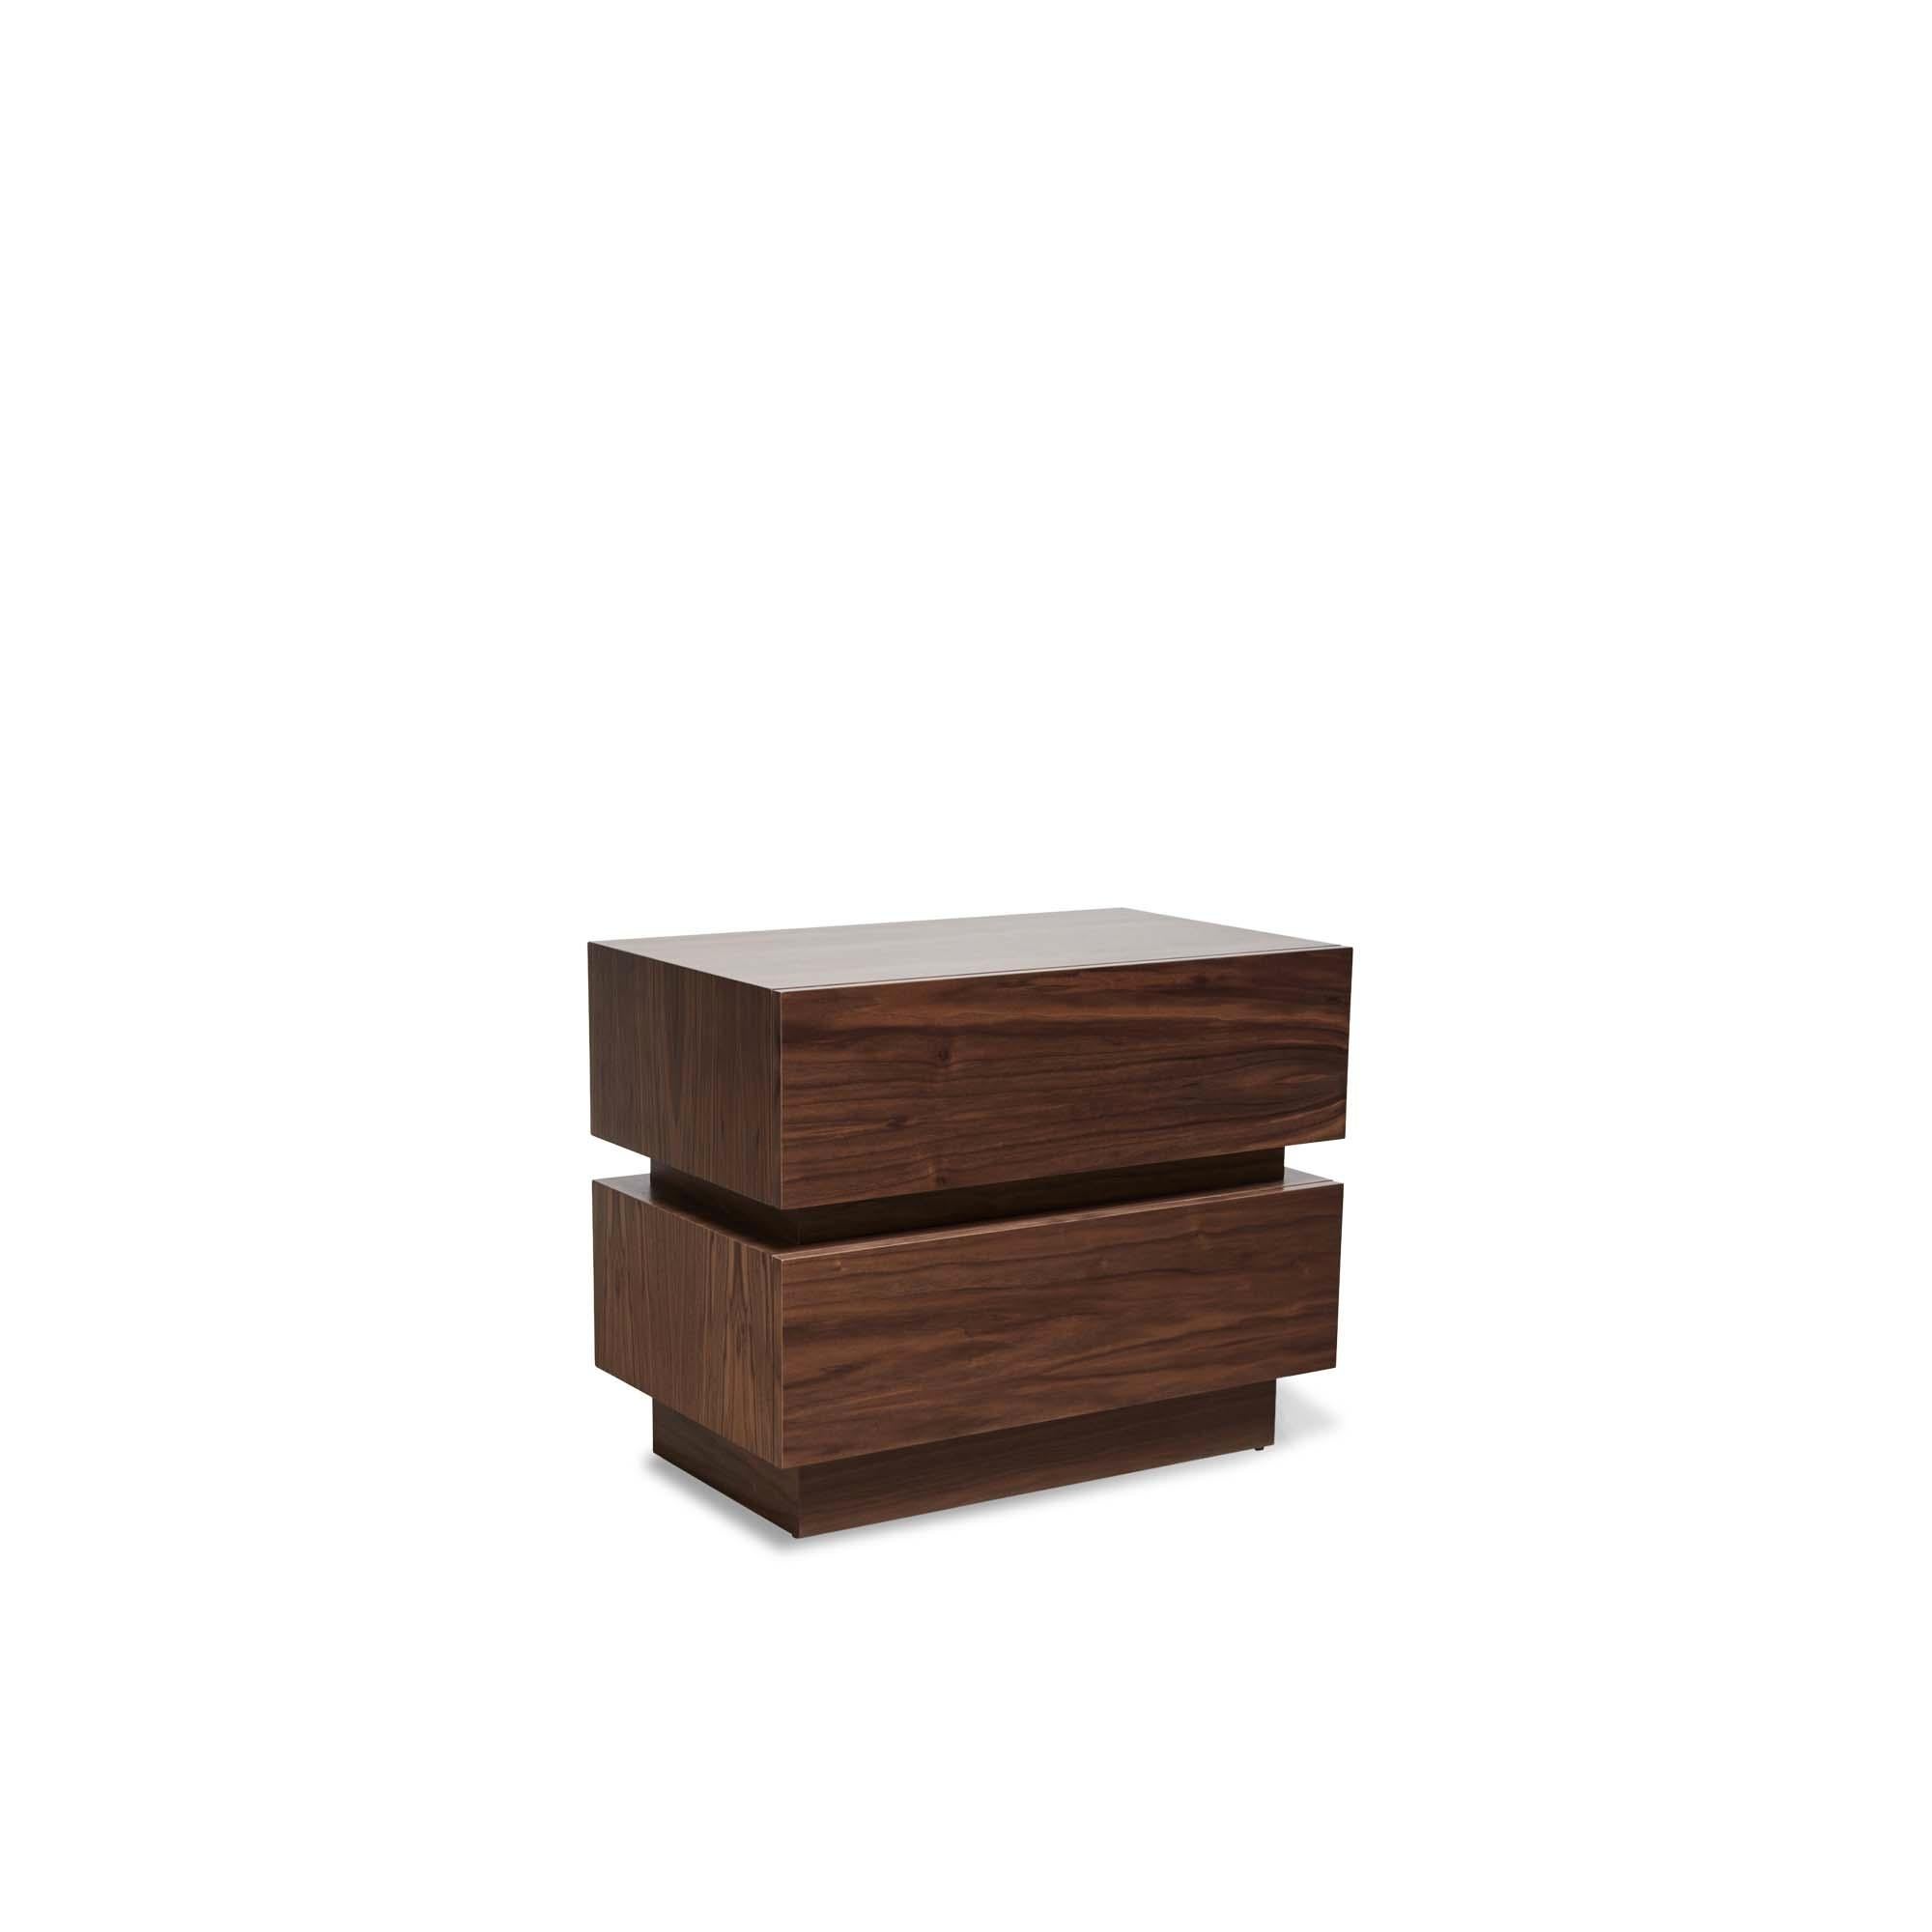 The stacked box nightstand is a bedside table with two drawers that is available in either American walnut or white oak. Available in two sizes.

The Lawson-Fenning Collection is designed and handmade in Los Angeles, California.

 